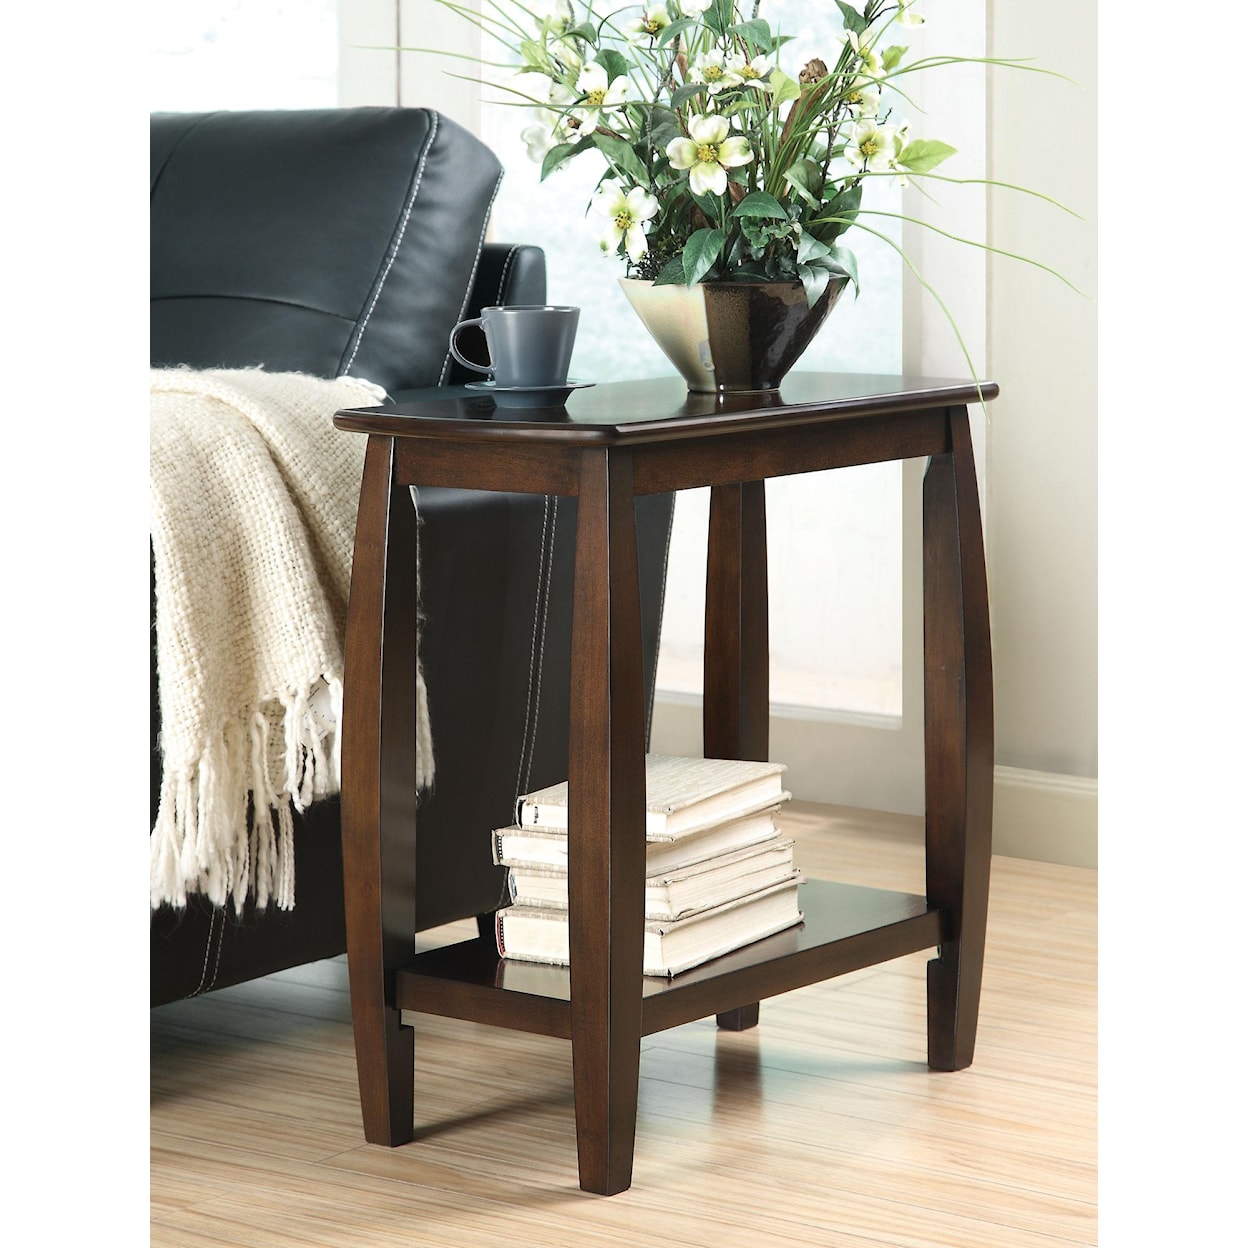 Michael Alan CSR Select Accent Tables Chairside Table